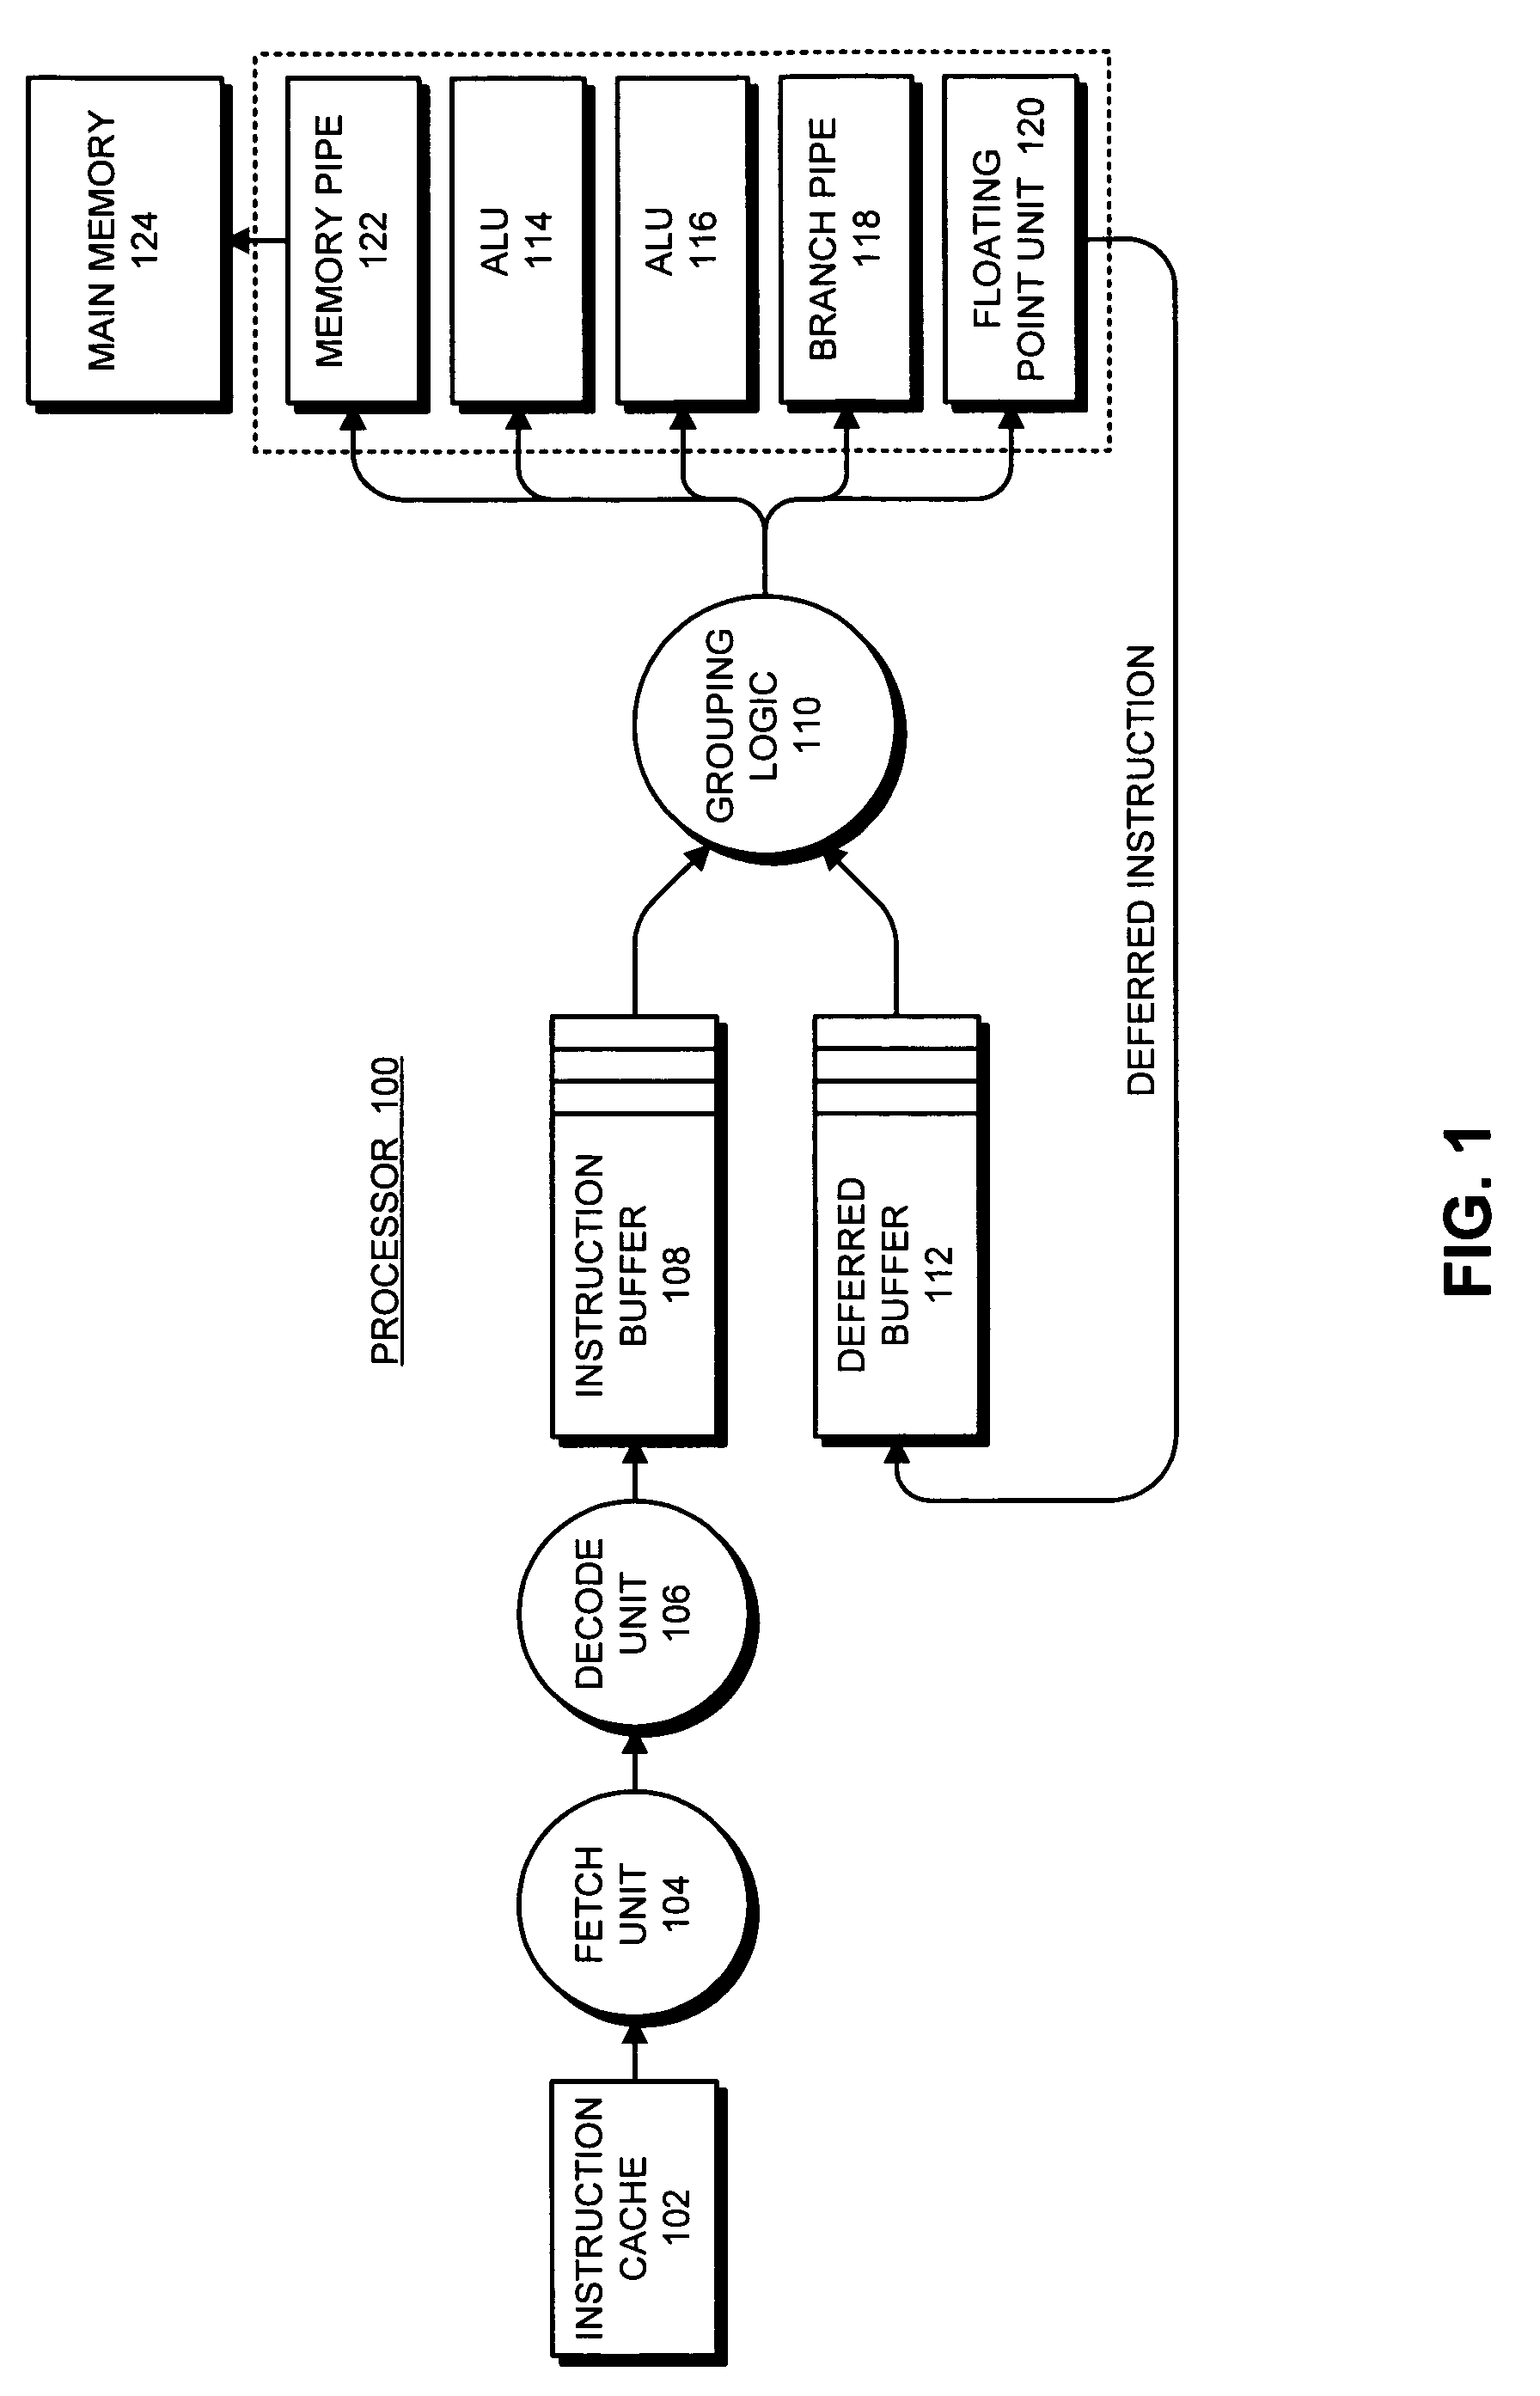 Method and apparatus for enforcing membar instruction semantics in an execute-ahead processor